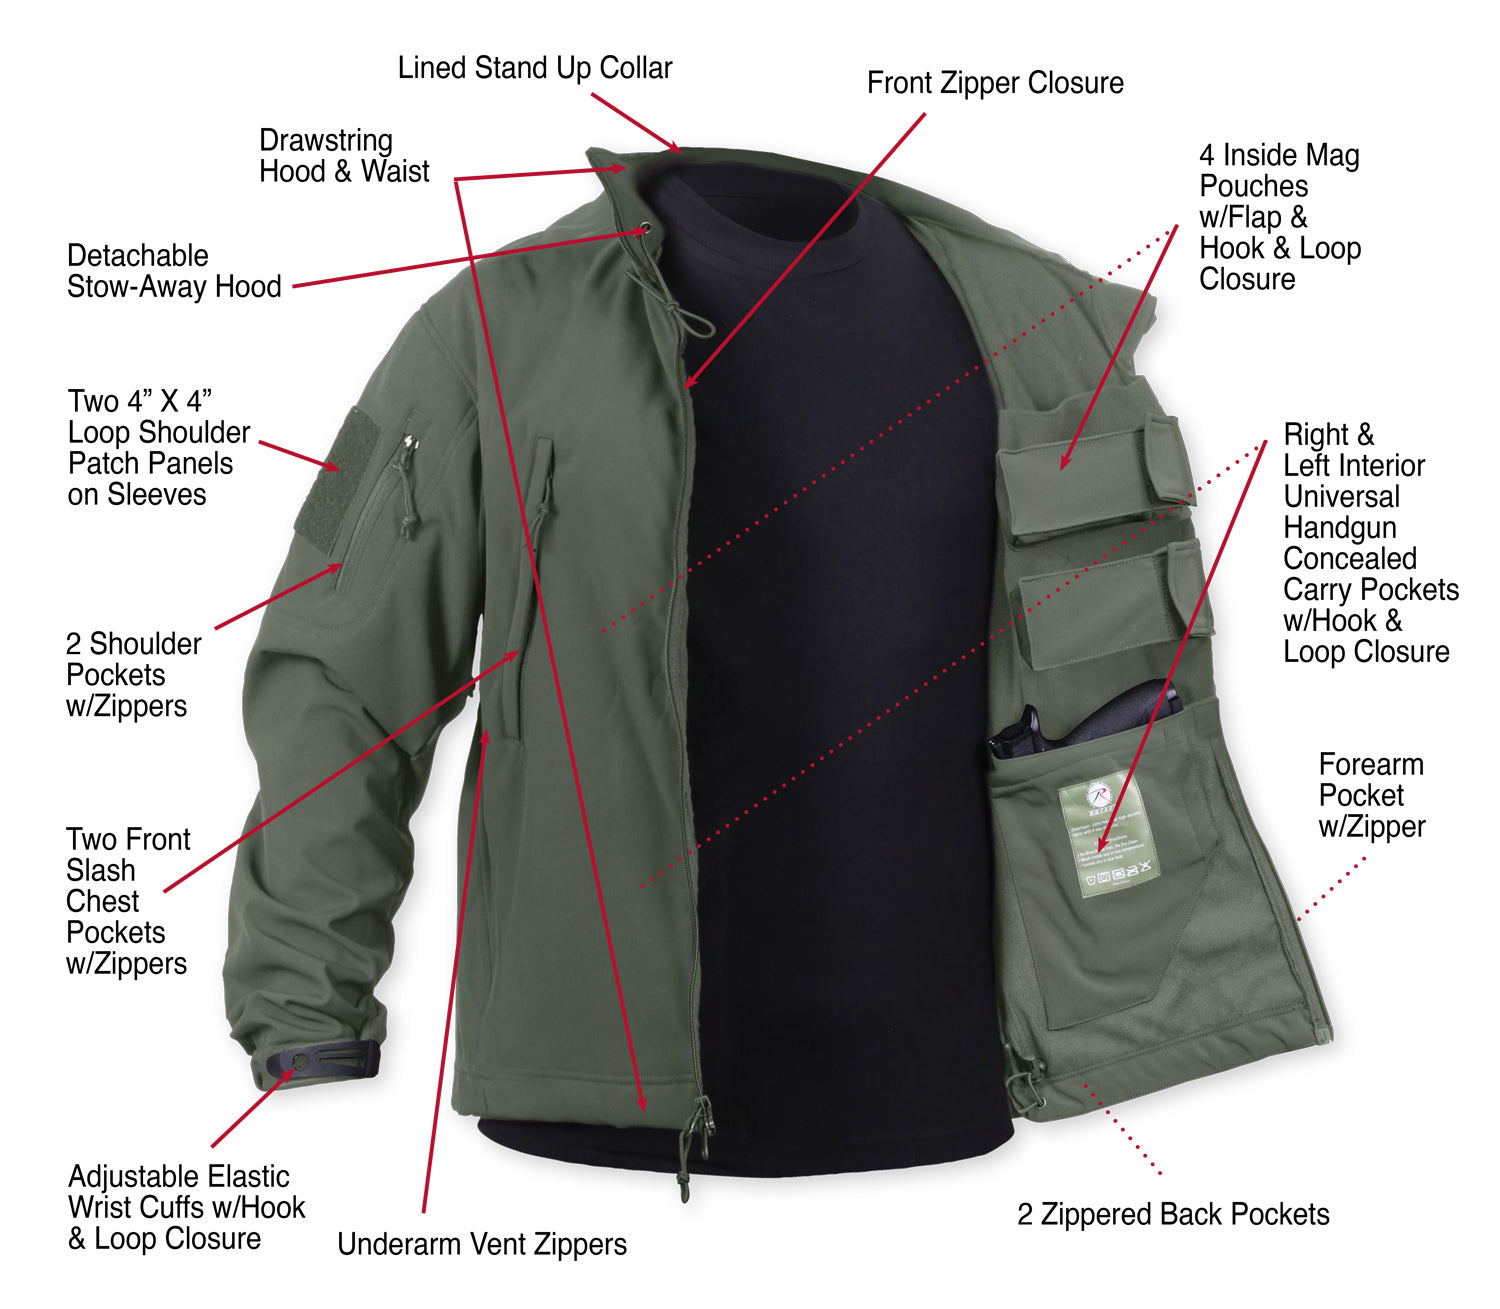 Milspec Concealed Carry Soft Shell Jacket Concealed Carry Clothing MilTac Tactical Military Outdoor Gear Australia